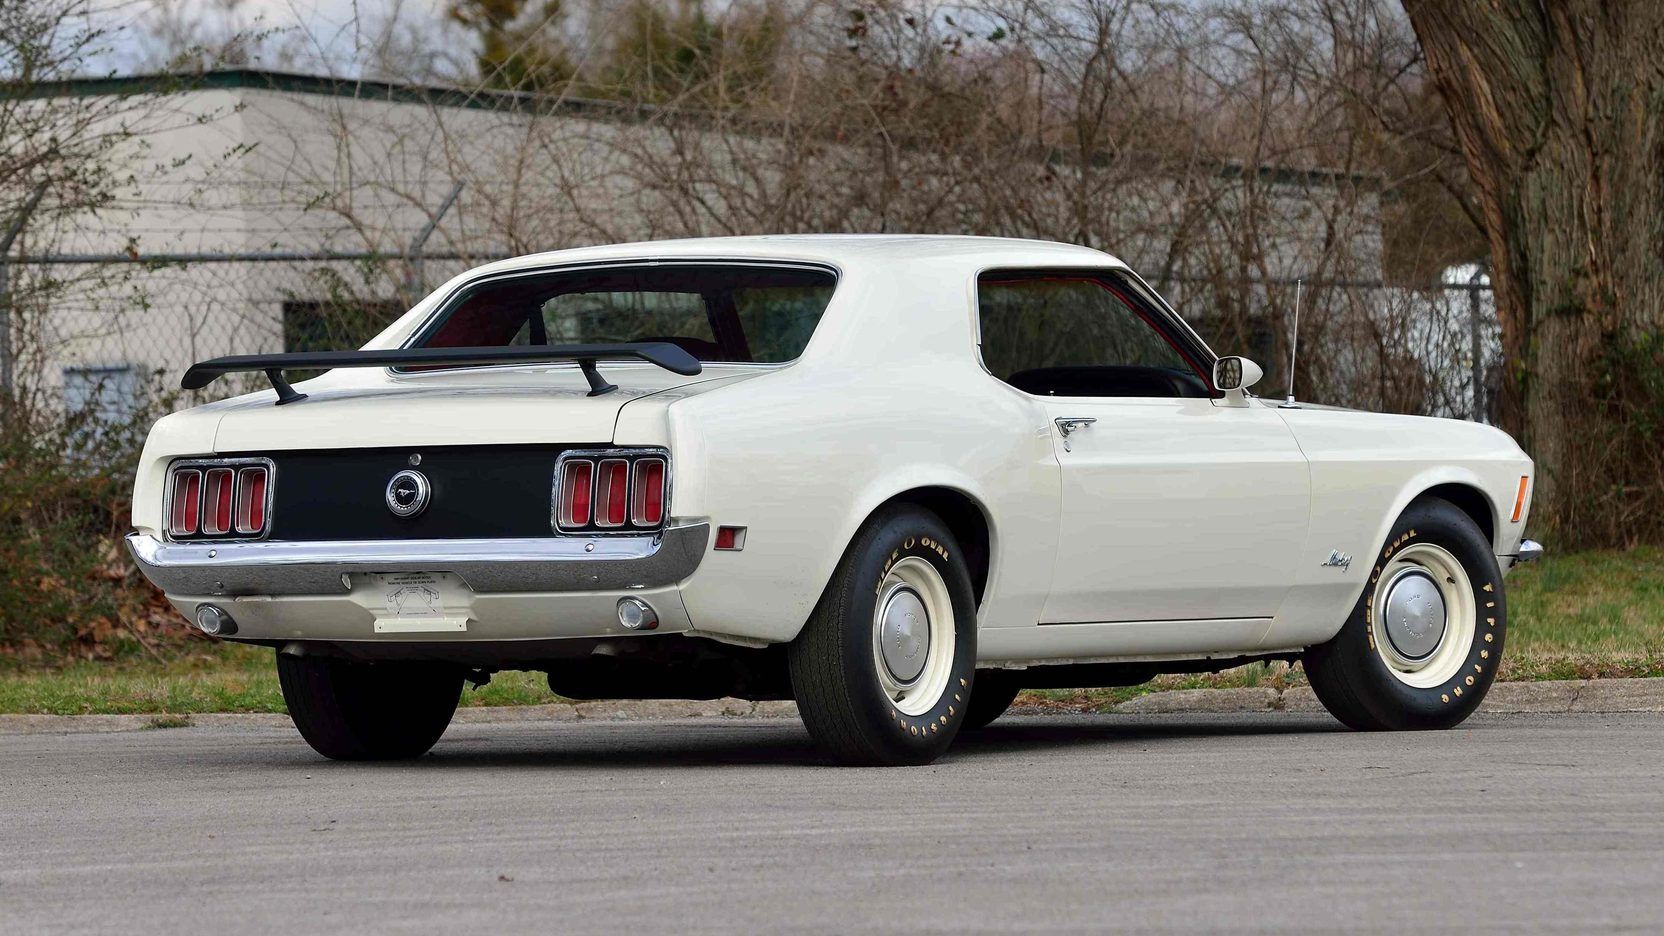 White 1970 Ford Mustang Coupe on the road